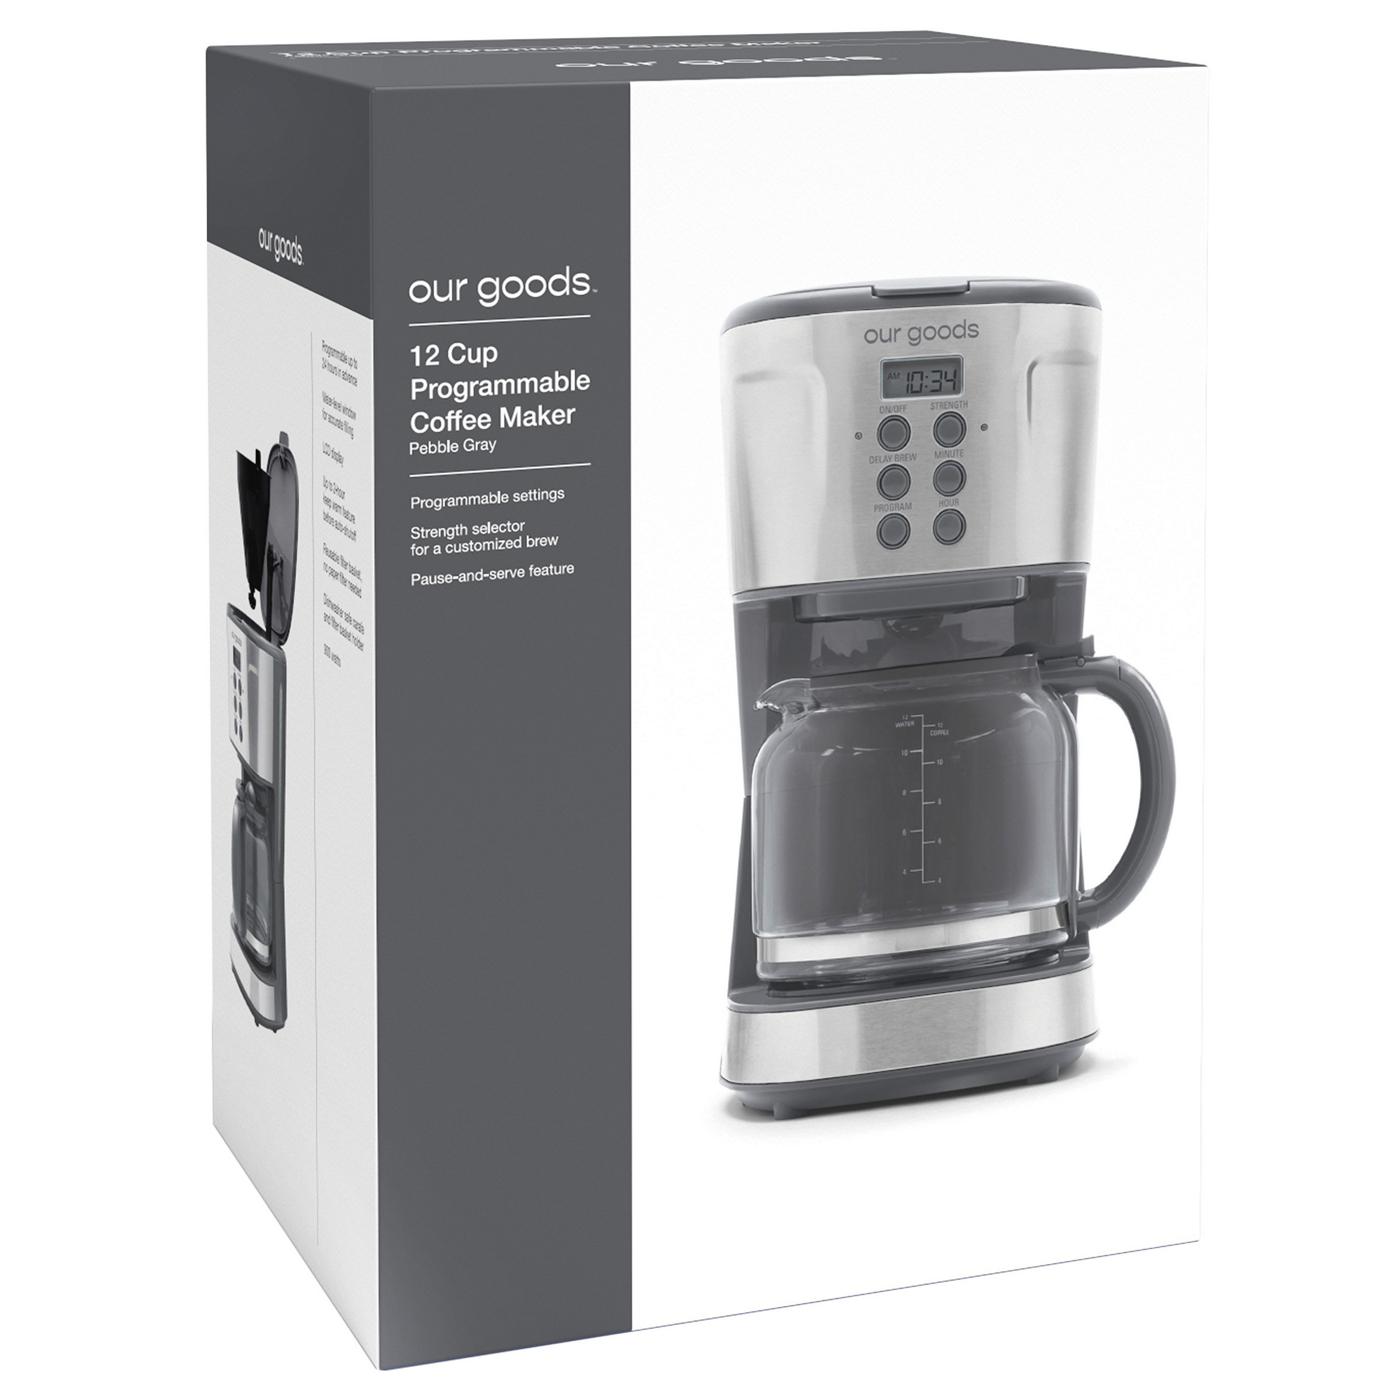 our goods Programmable Coffee Maker - Pebble Gray; image 4 of 5